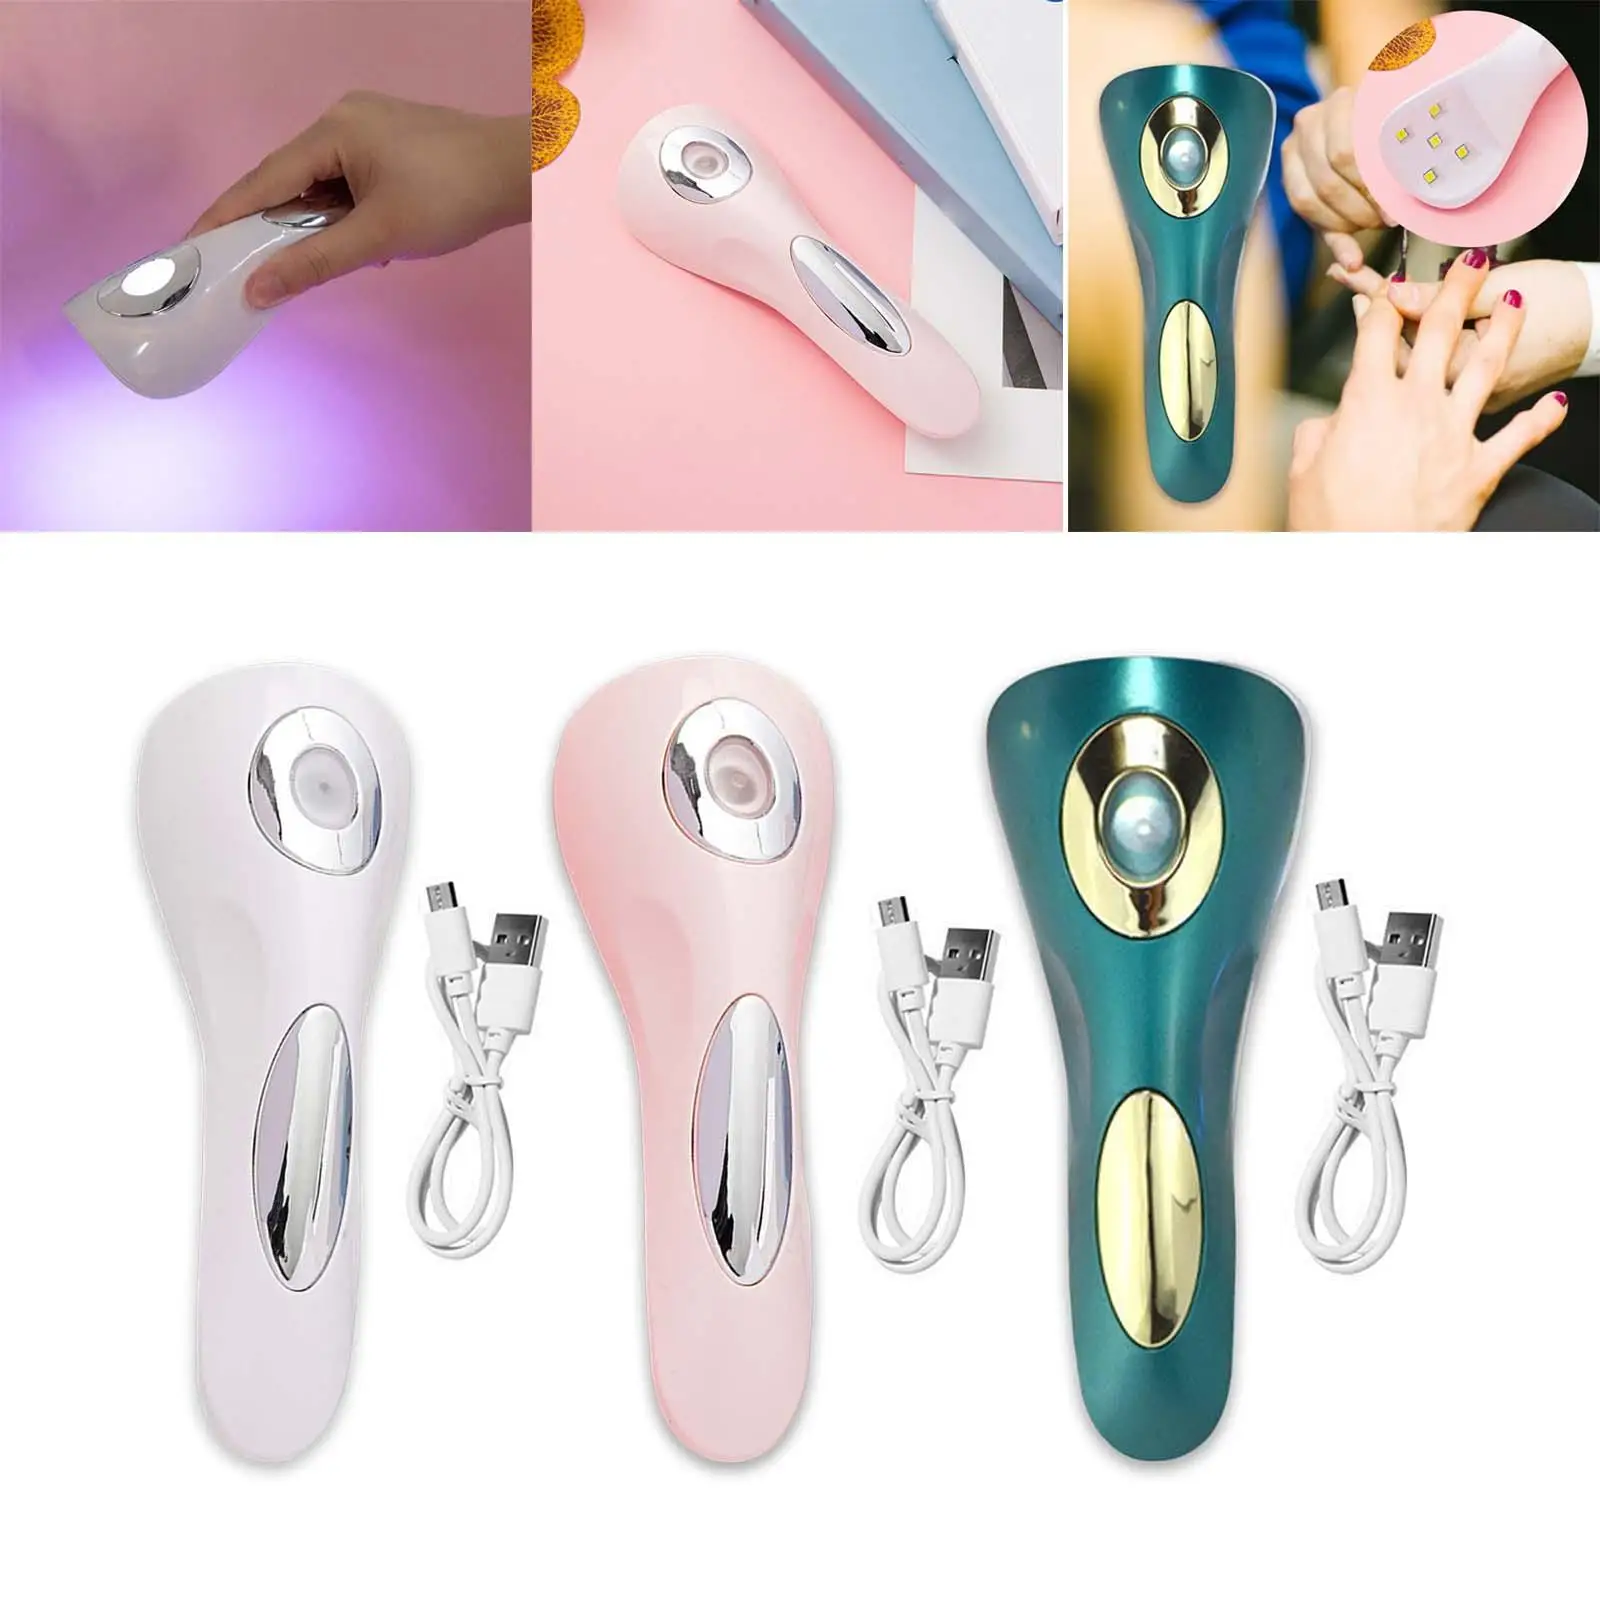 Handheld Nail Light Professional Rechargable Nail Art Tools for Female Birthday Gifts